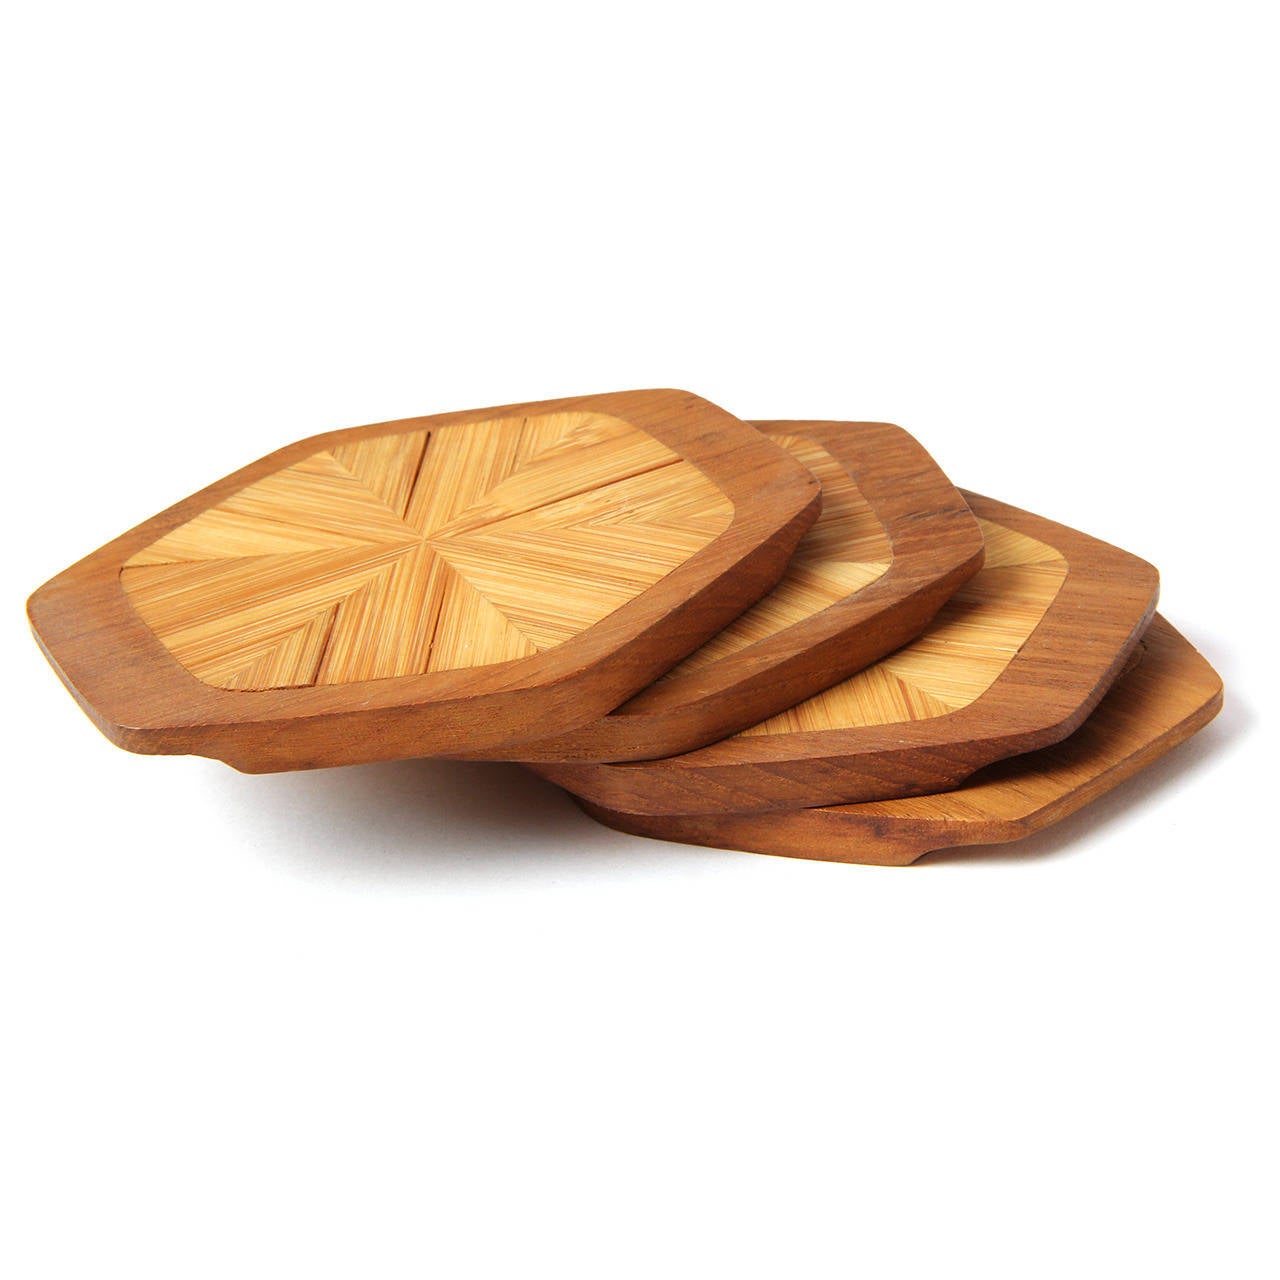 A group of finely crafted hexagonal teak coasters inlaid with split bamboo arranged in a sunburst pattern.